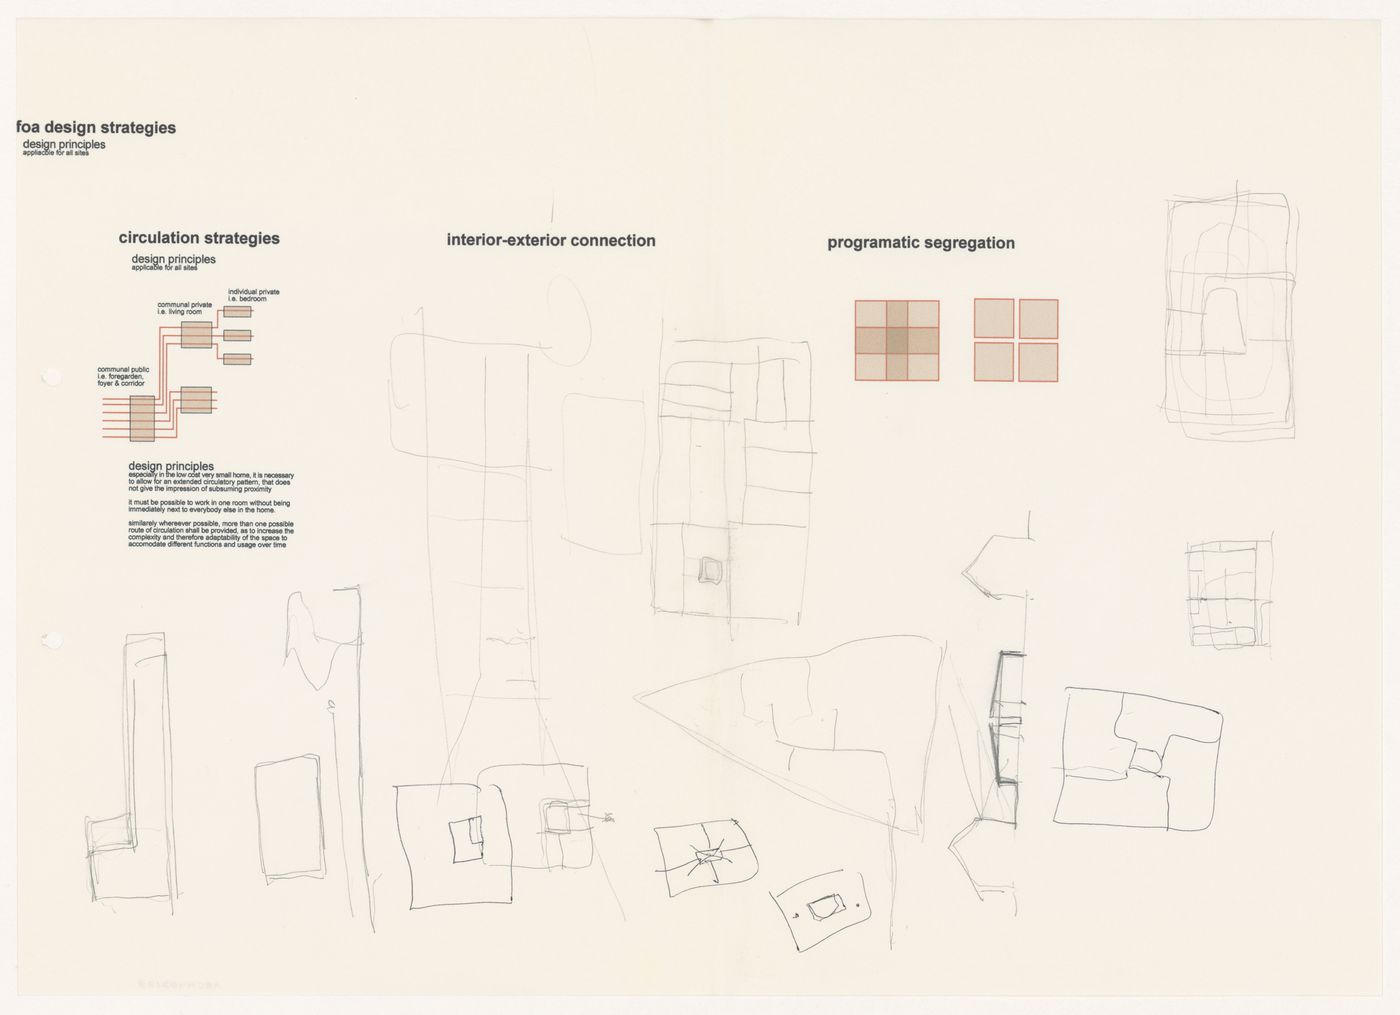 Design principles with sketches for Peabody Trust: Fresh Ideas for Low Cost Home Ownership, London, England